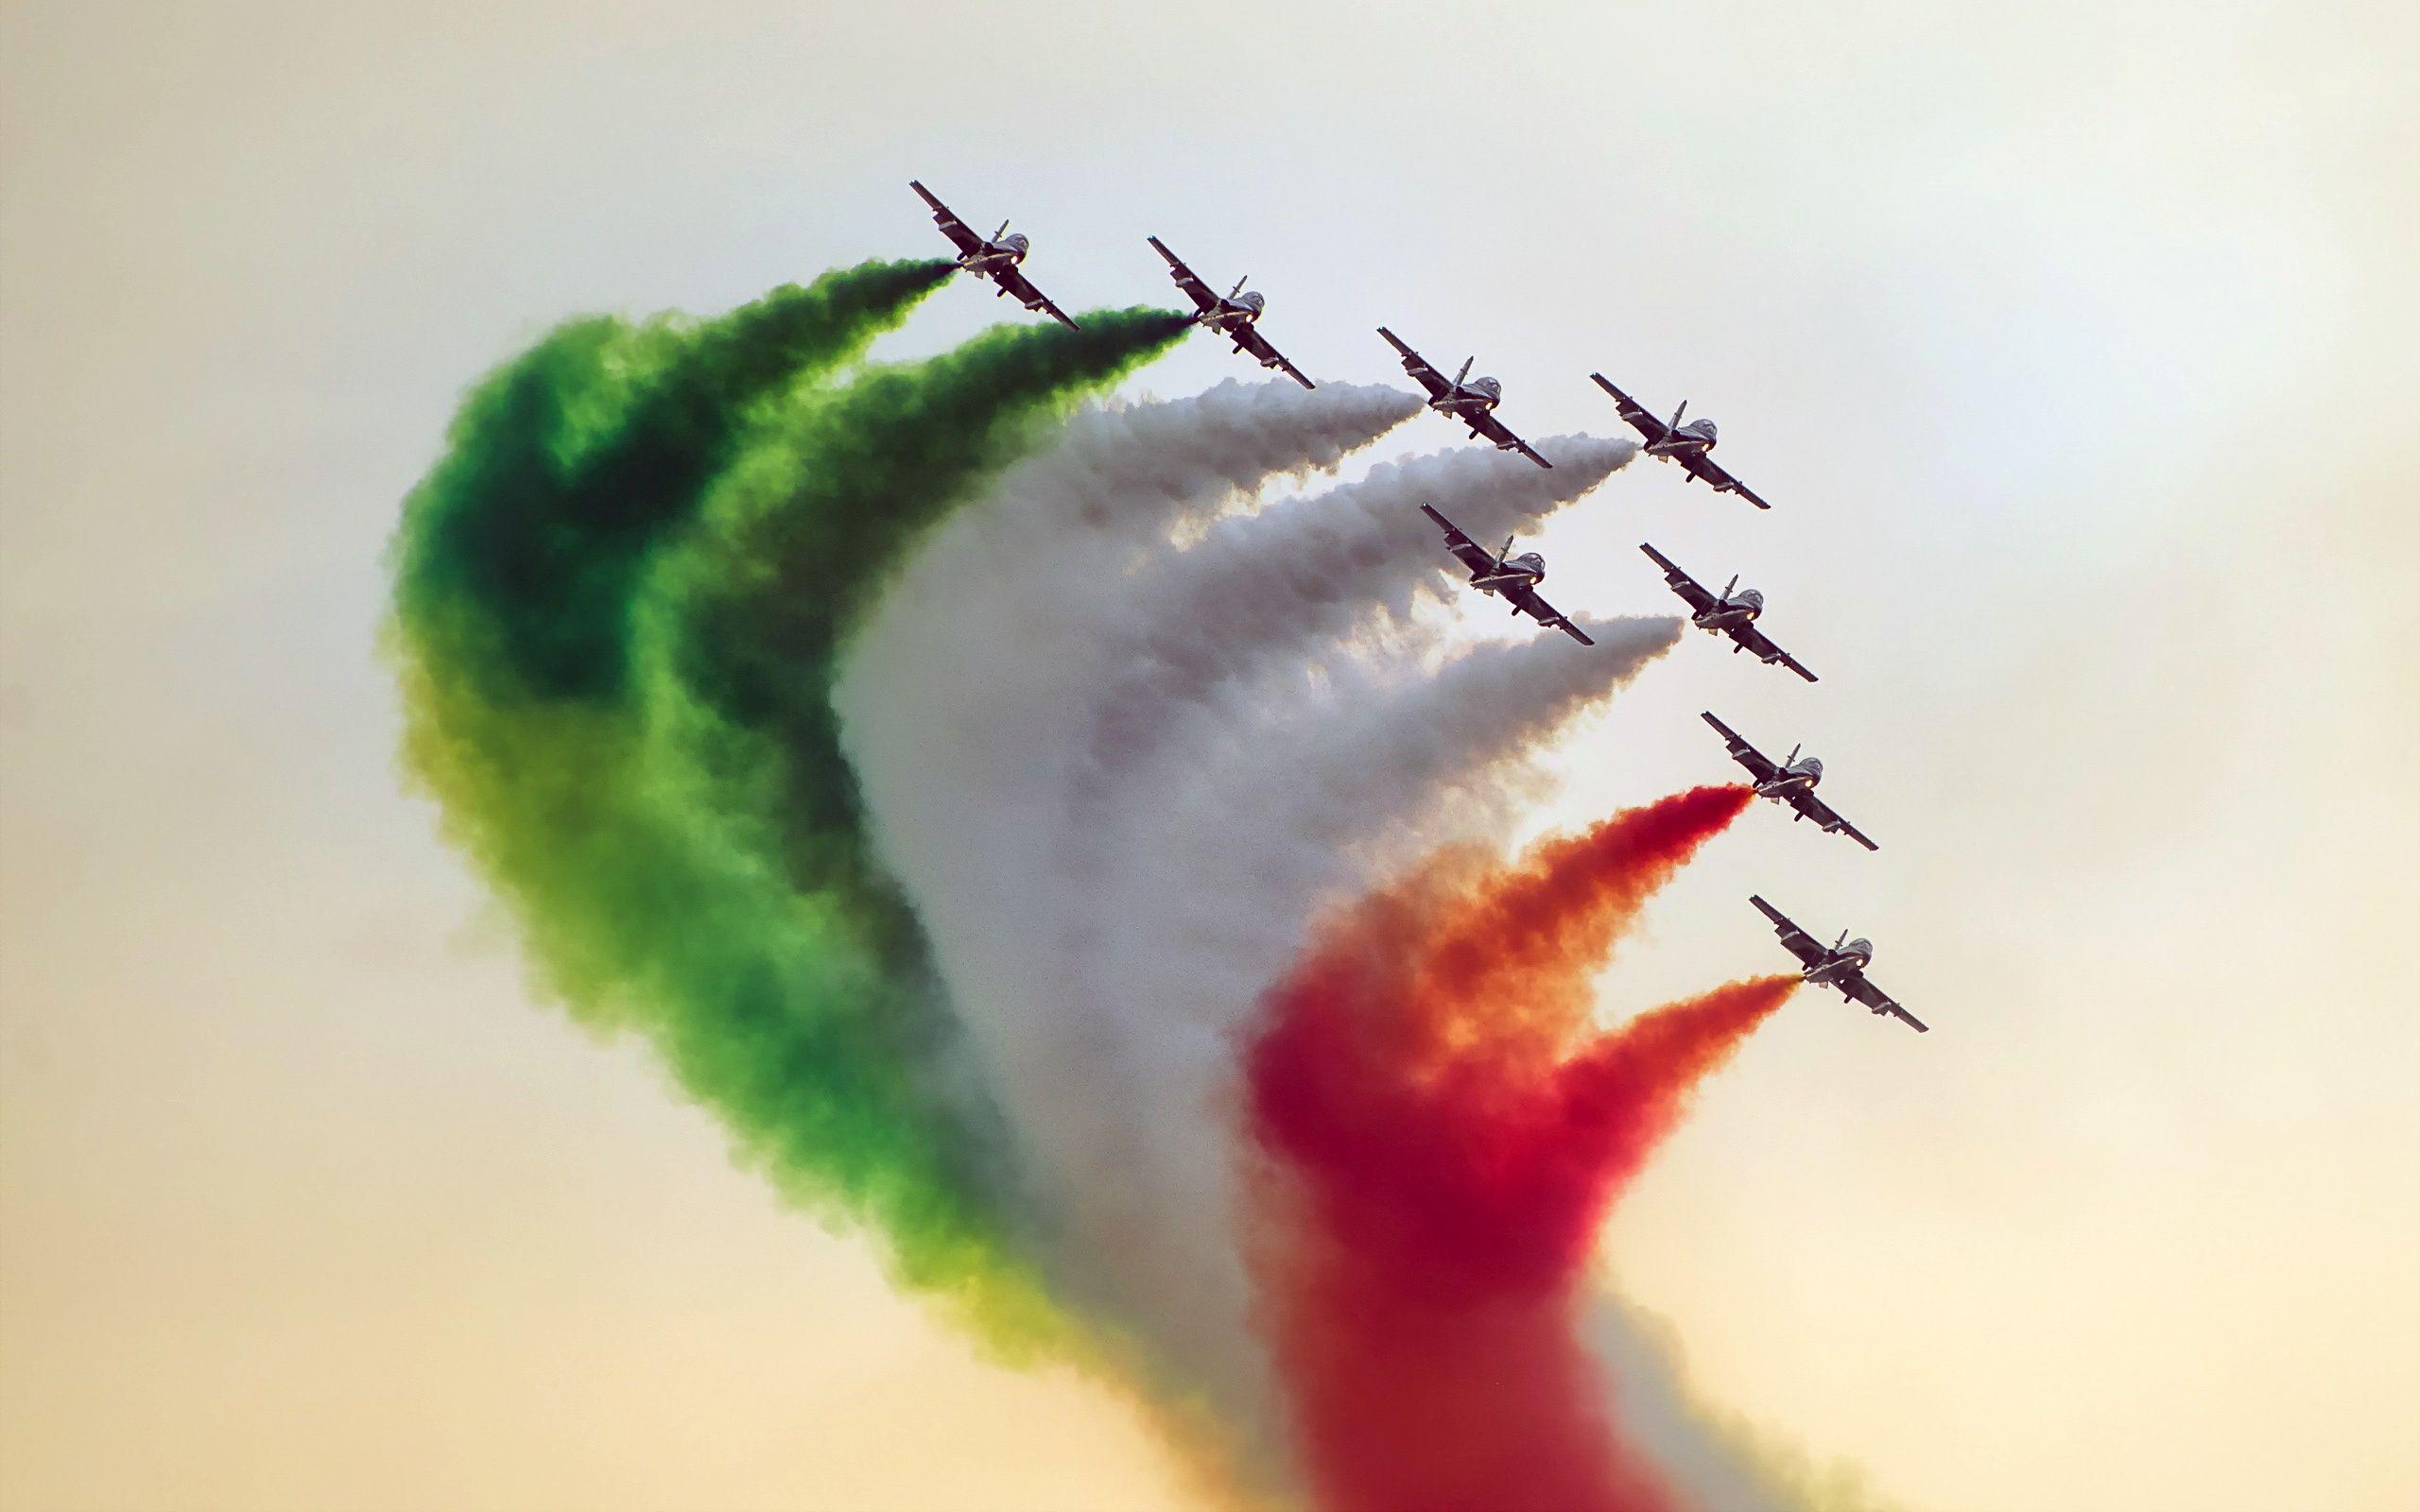 Indian Air Force Jet Fighters Wallpaper in jpg format for free download